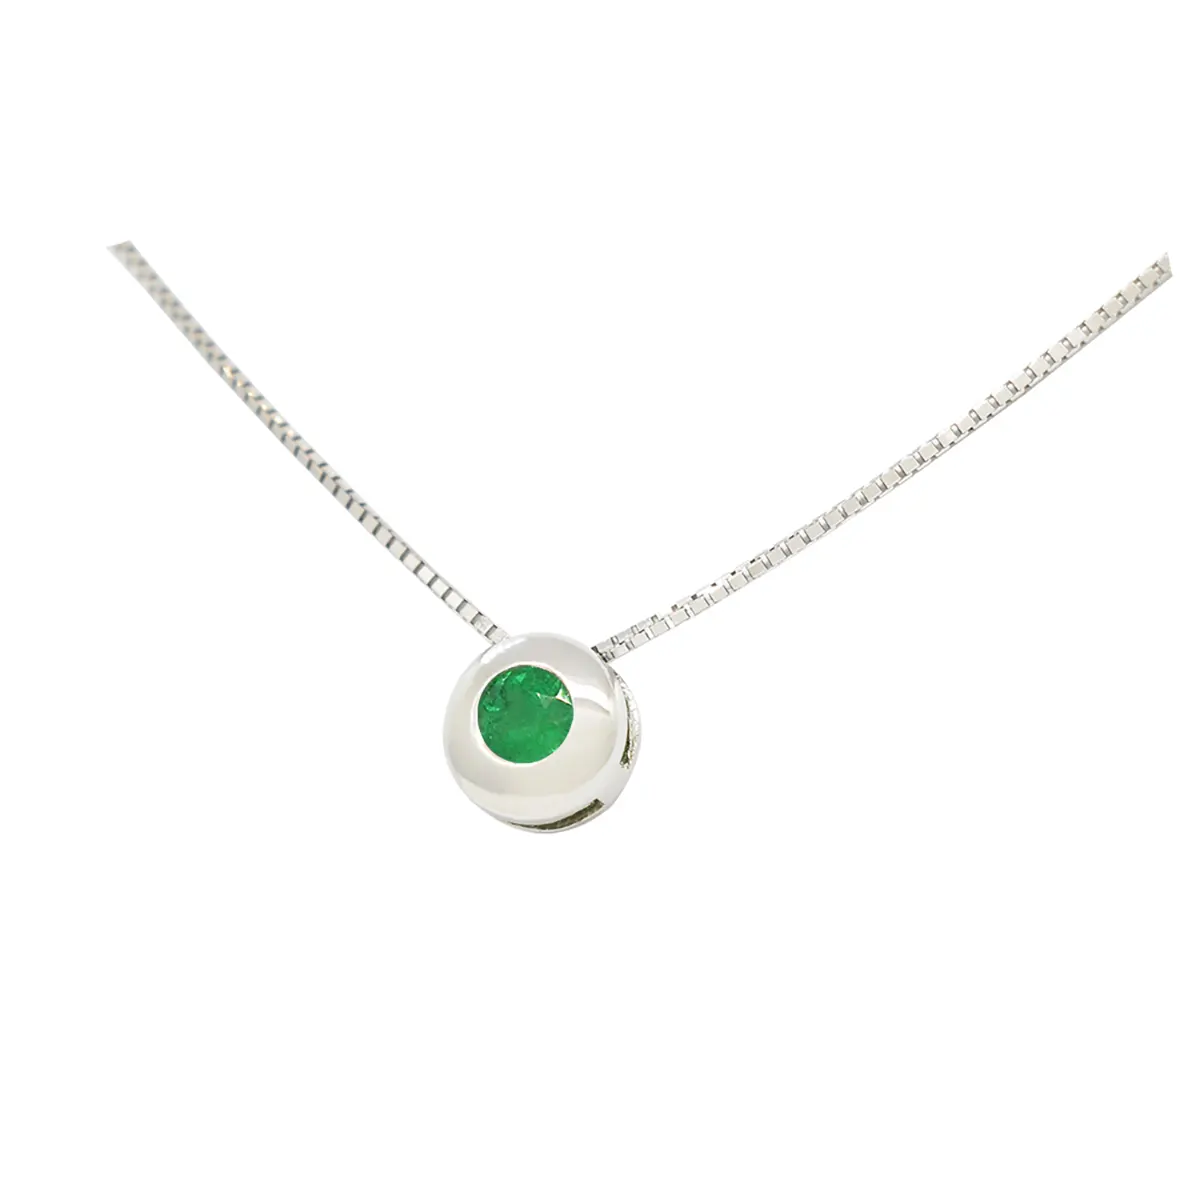 Solitaire Emerald Necklace in 18K White Gold with Round Emerald